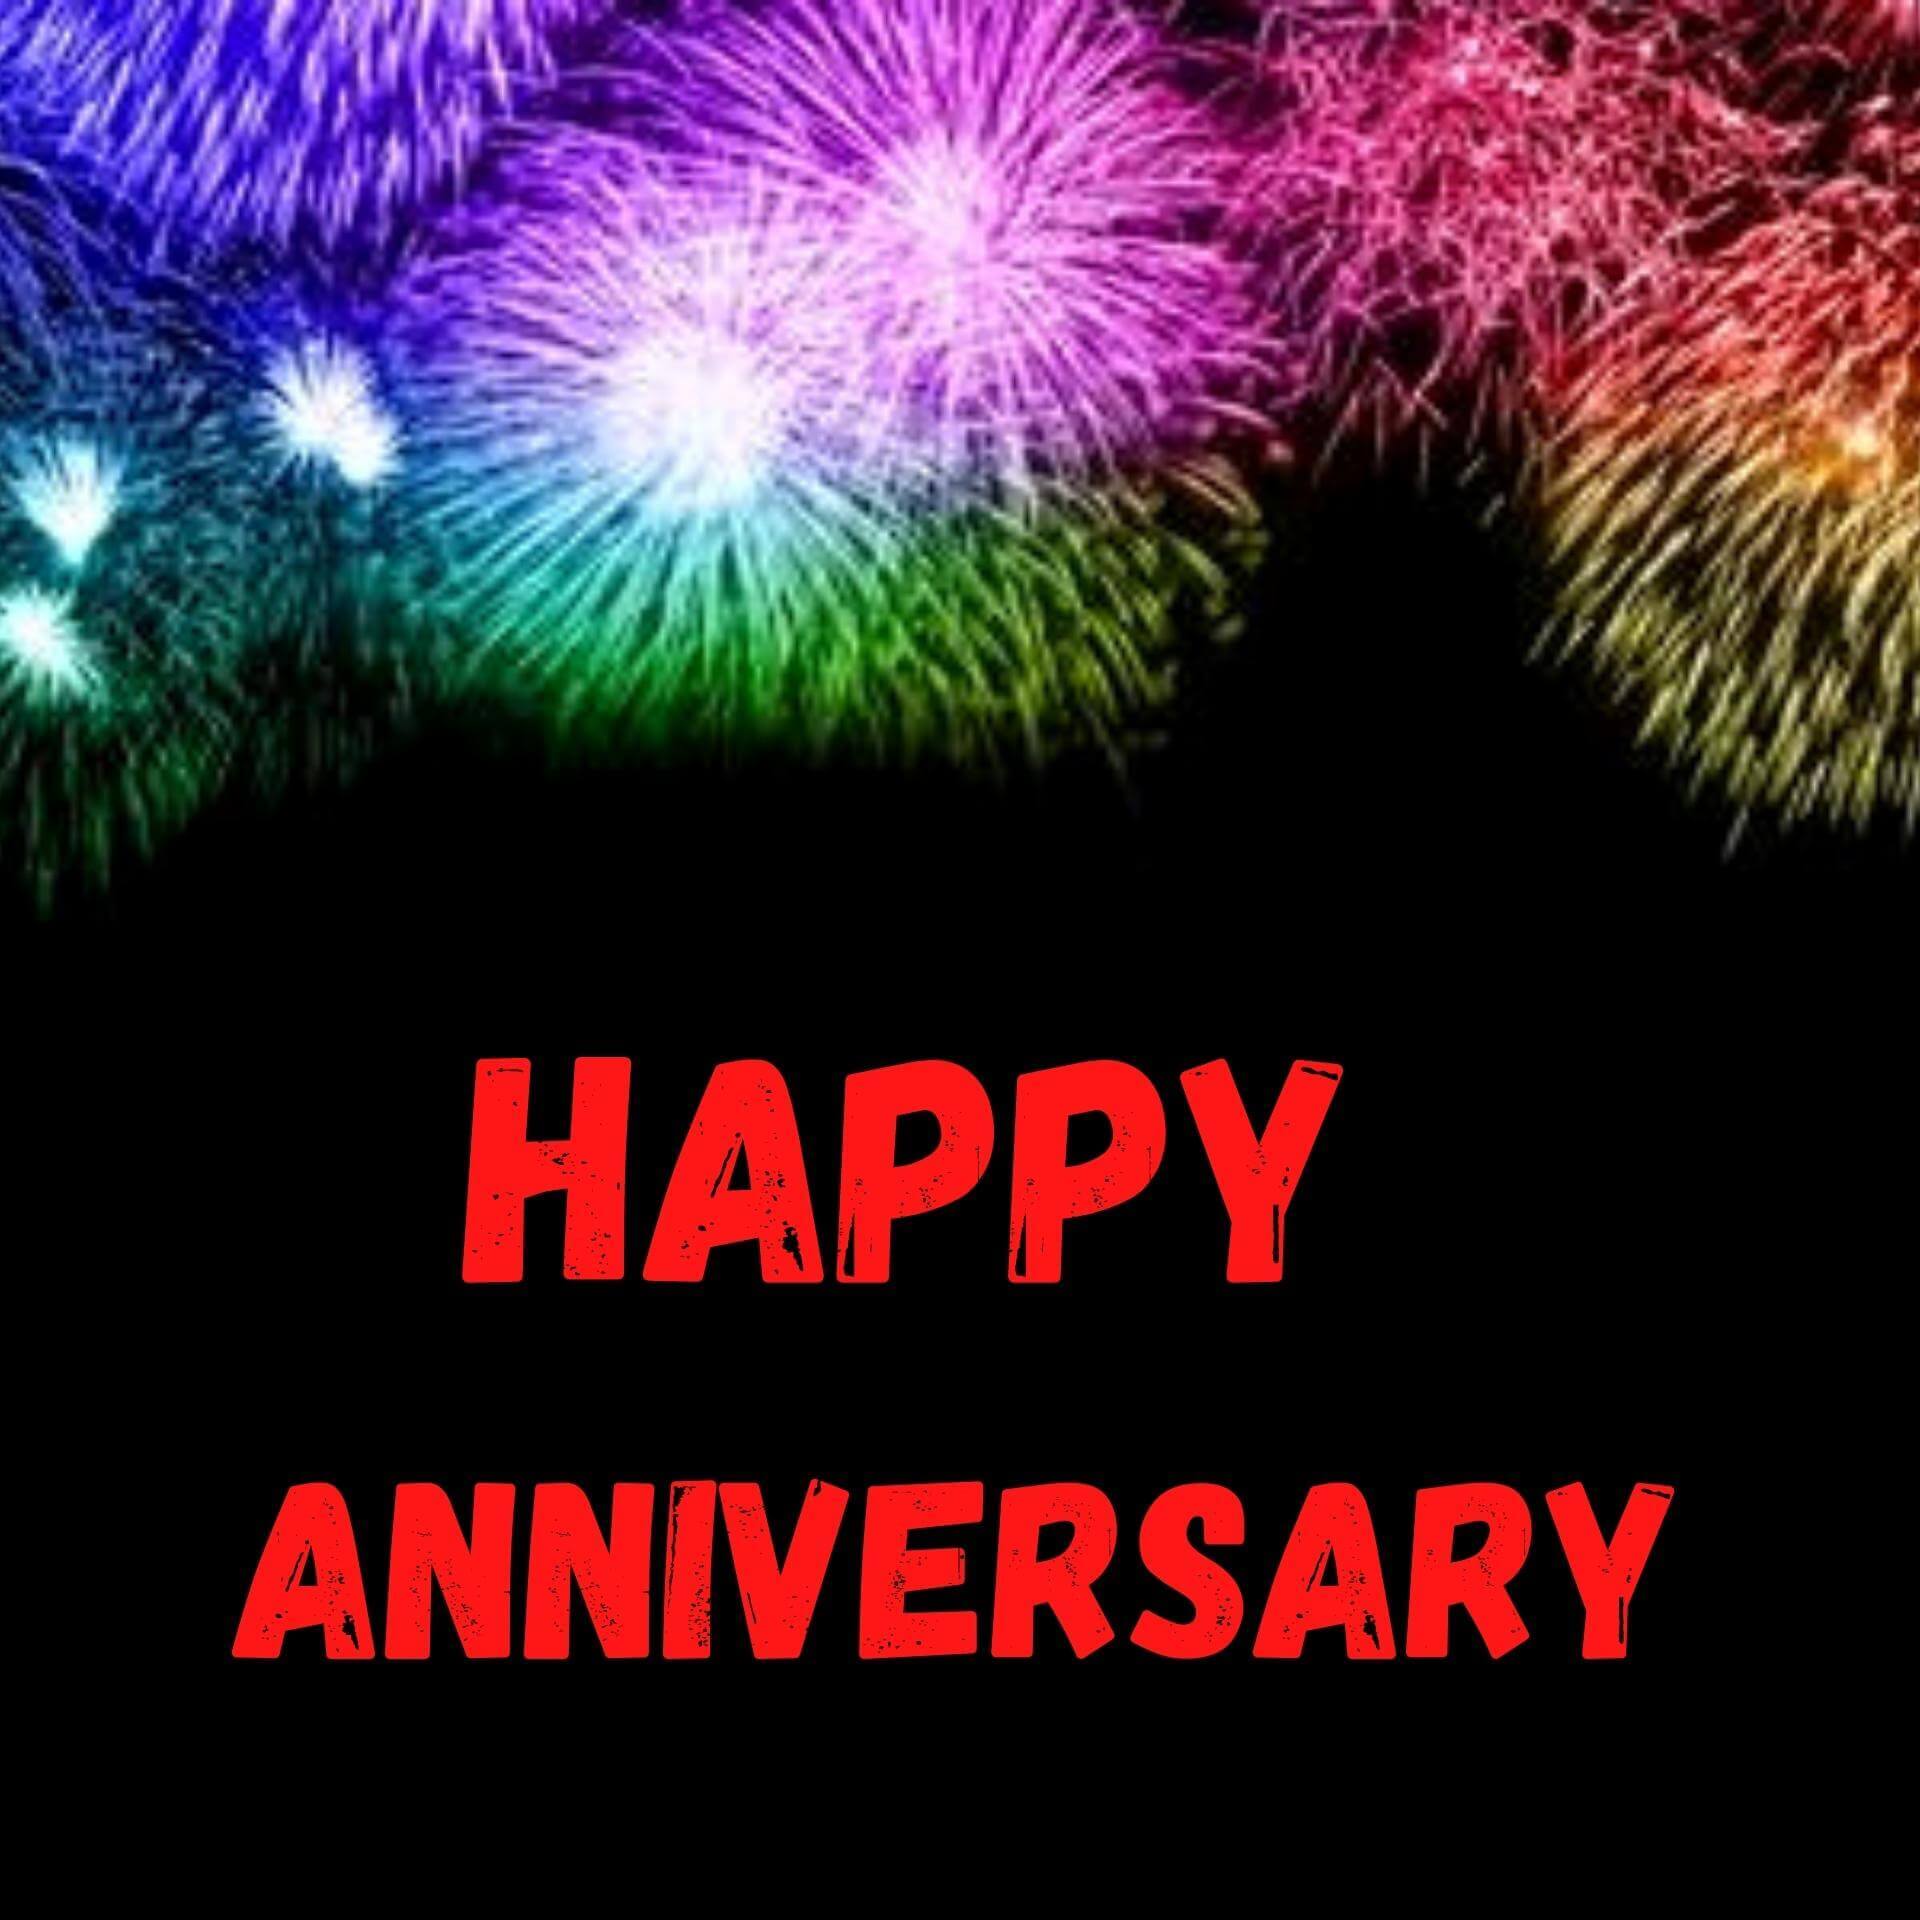 New HD happy anniversary images Wallpaper Free Download